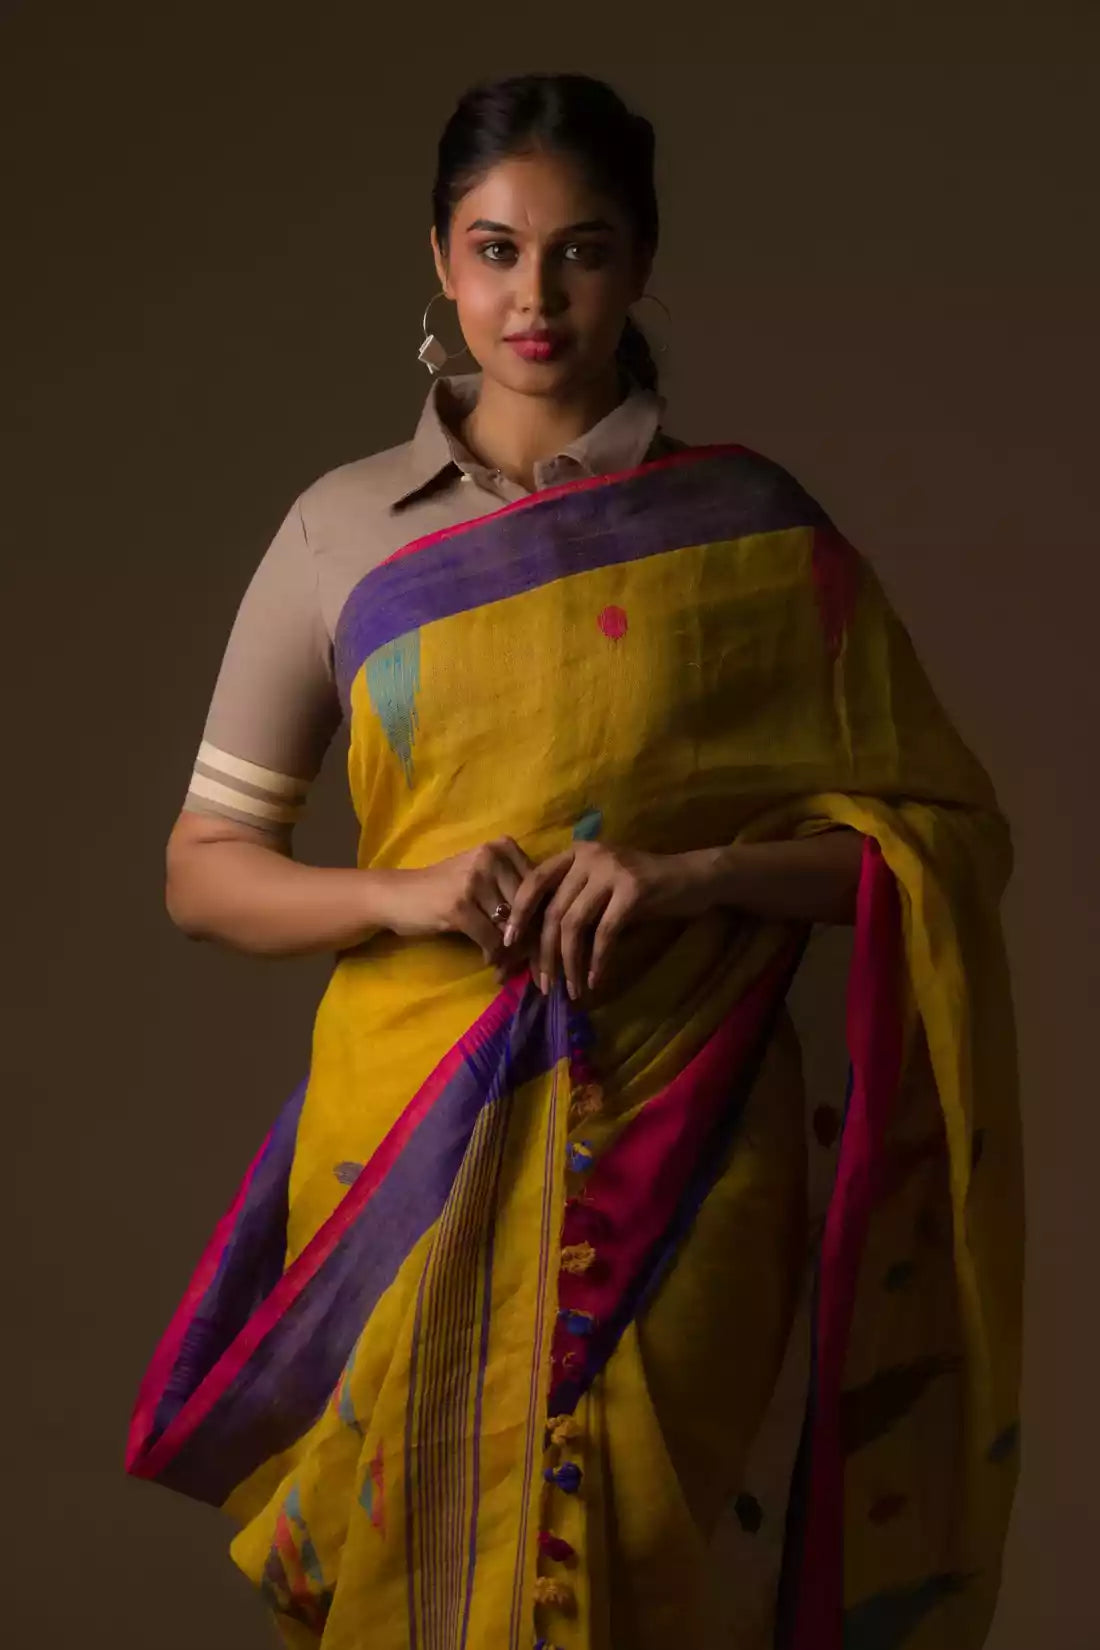 The woman in picture is wearing women workwear saree